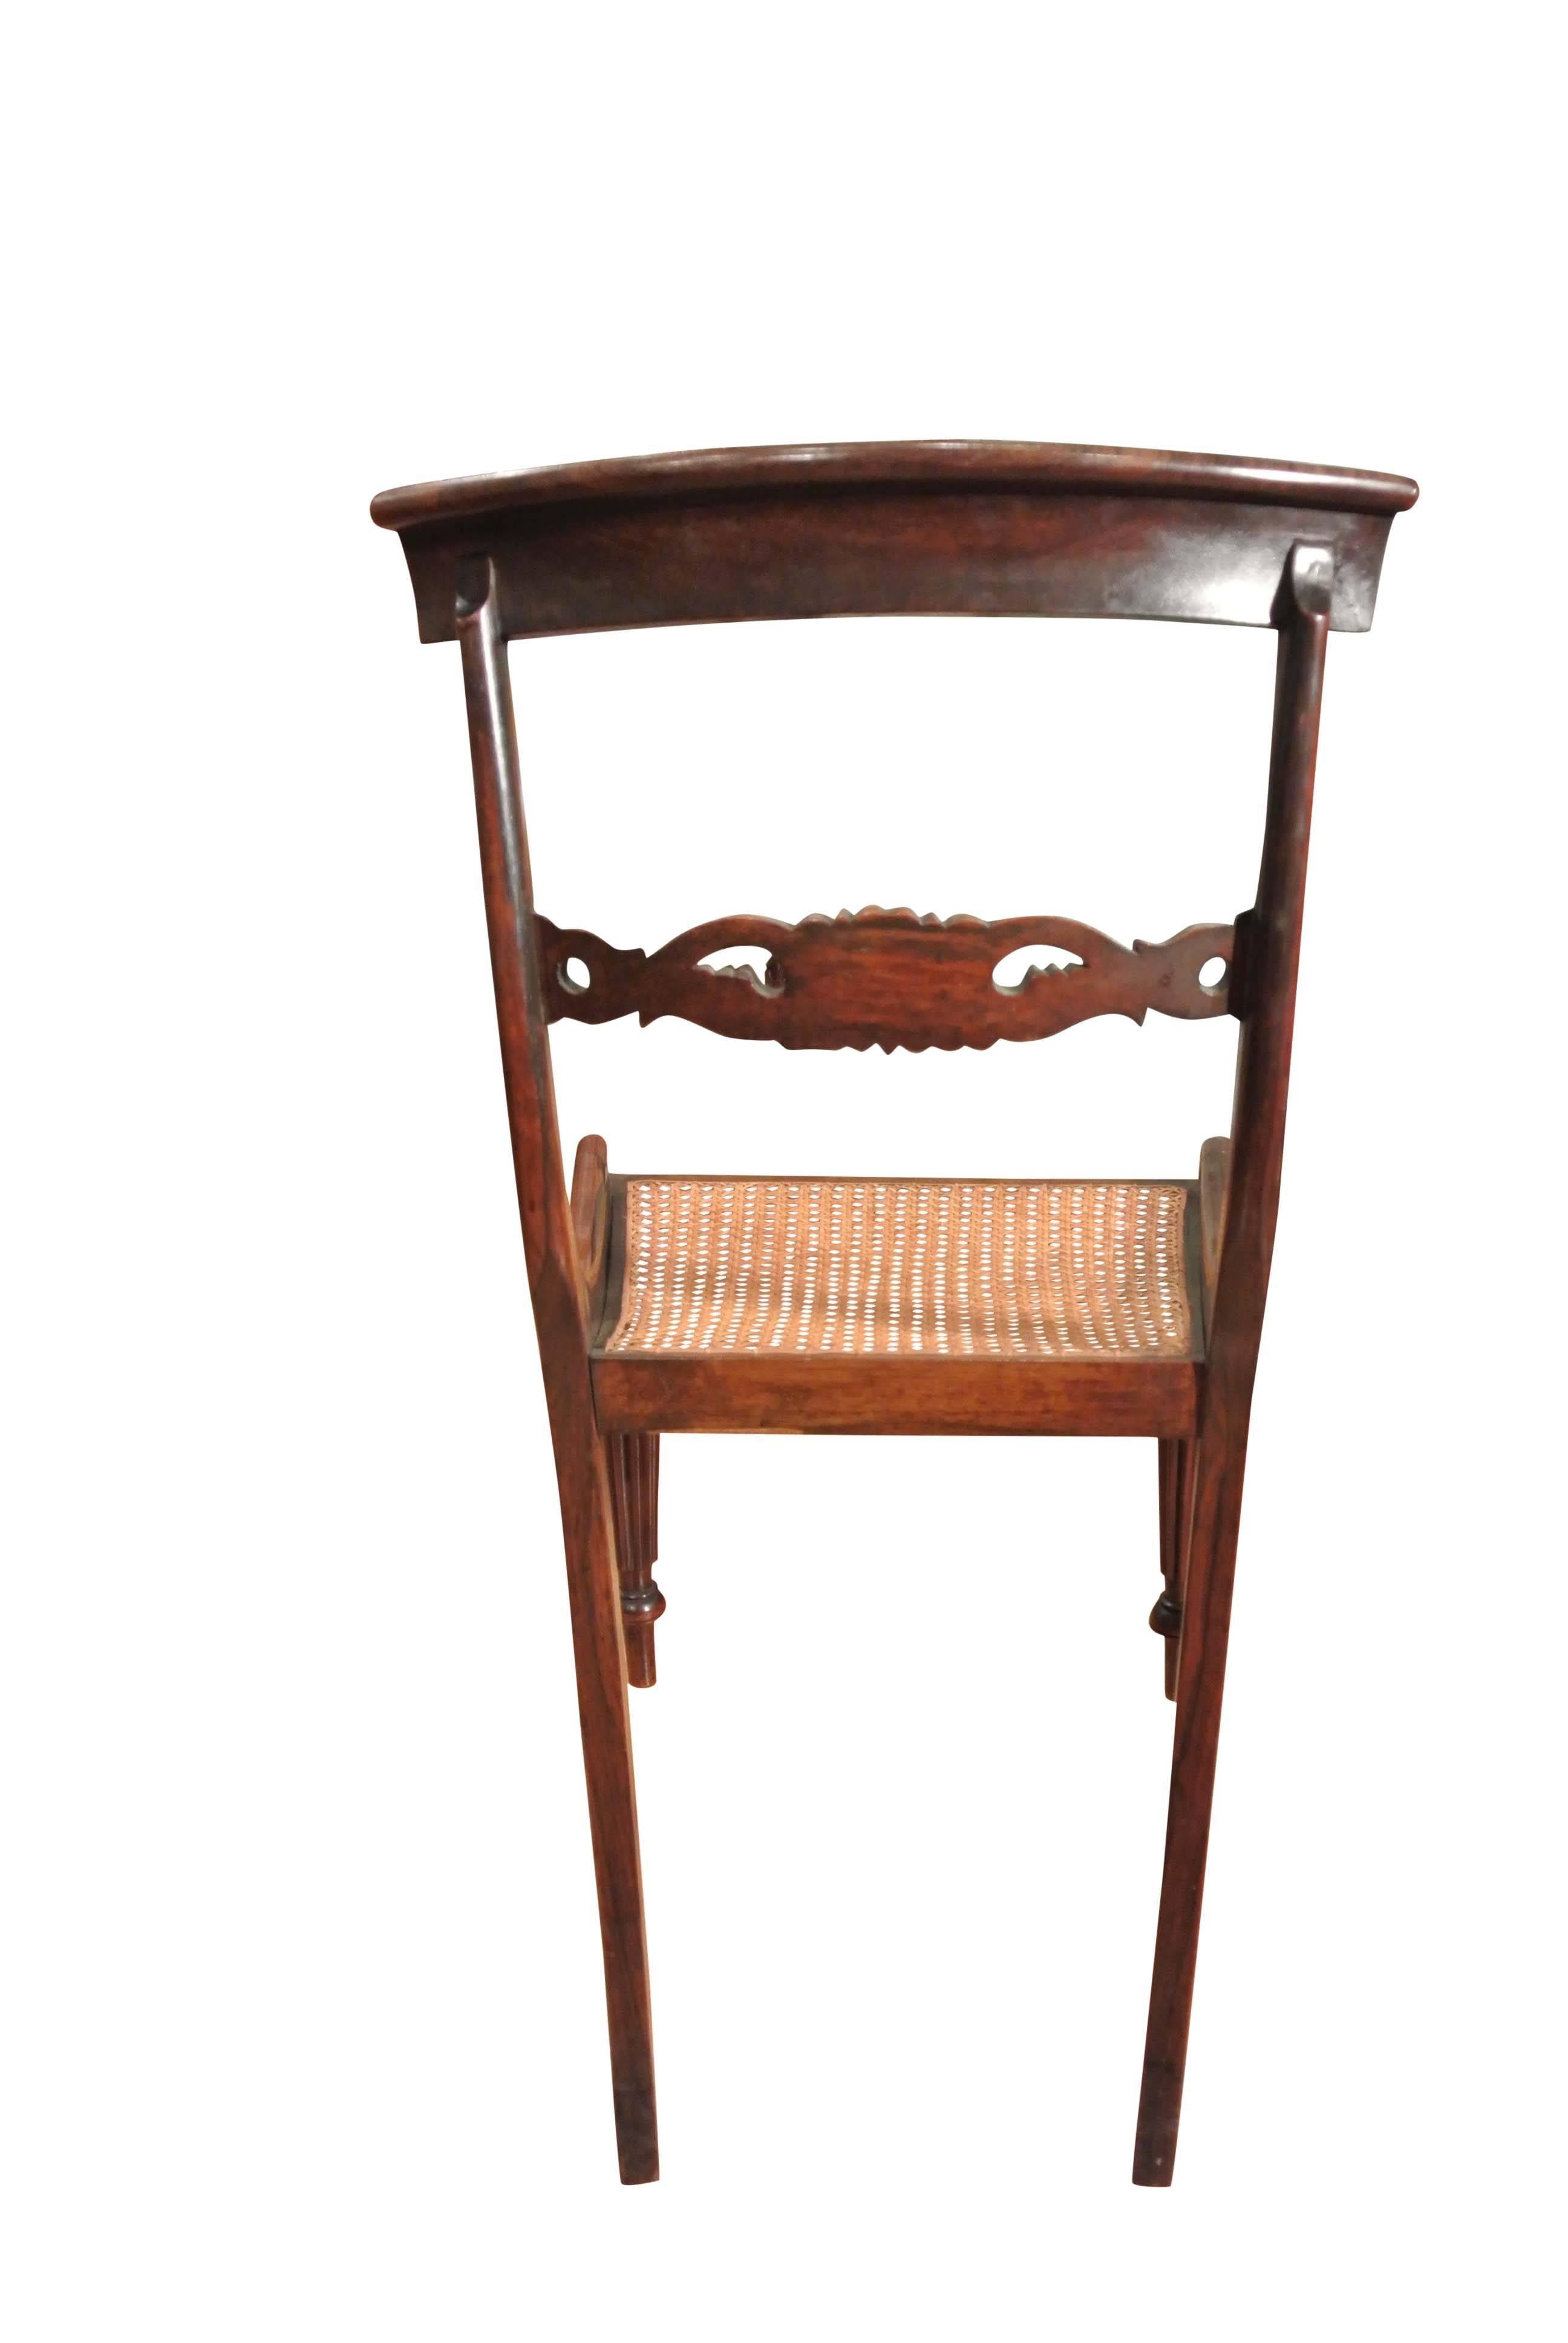 English 19th Century Regency Rosewood Dining Chairs